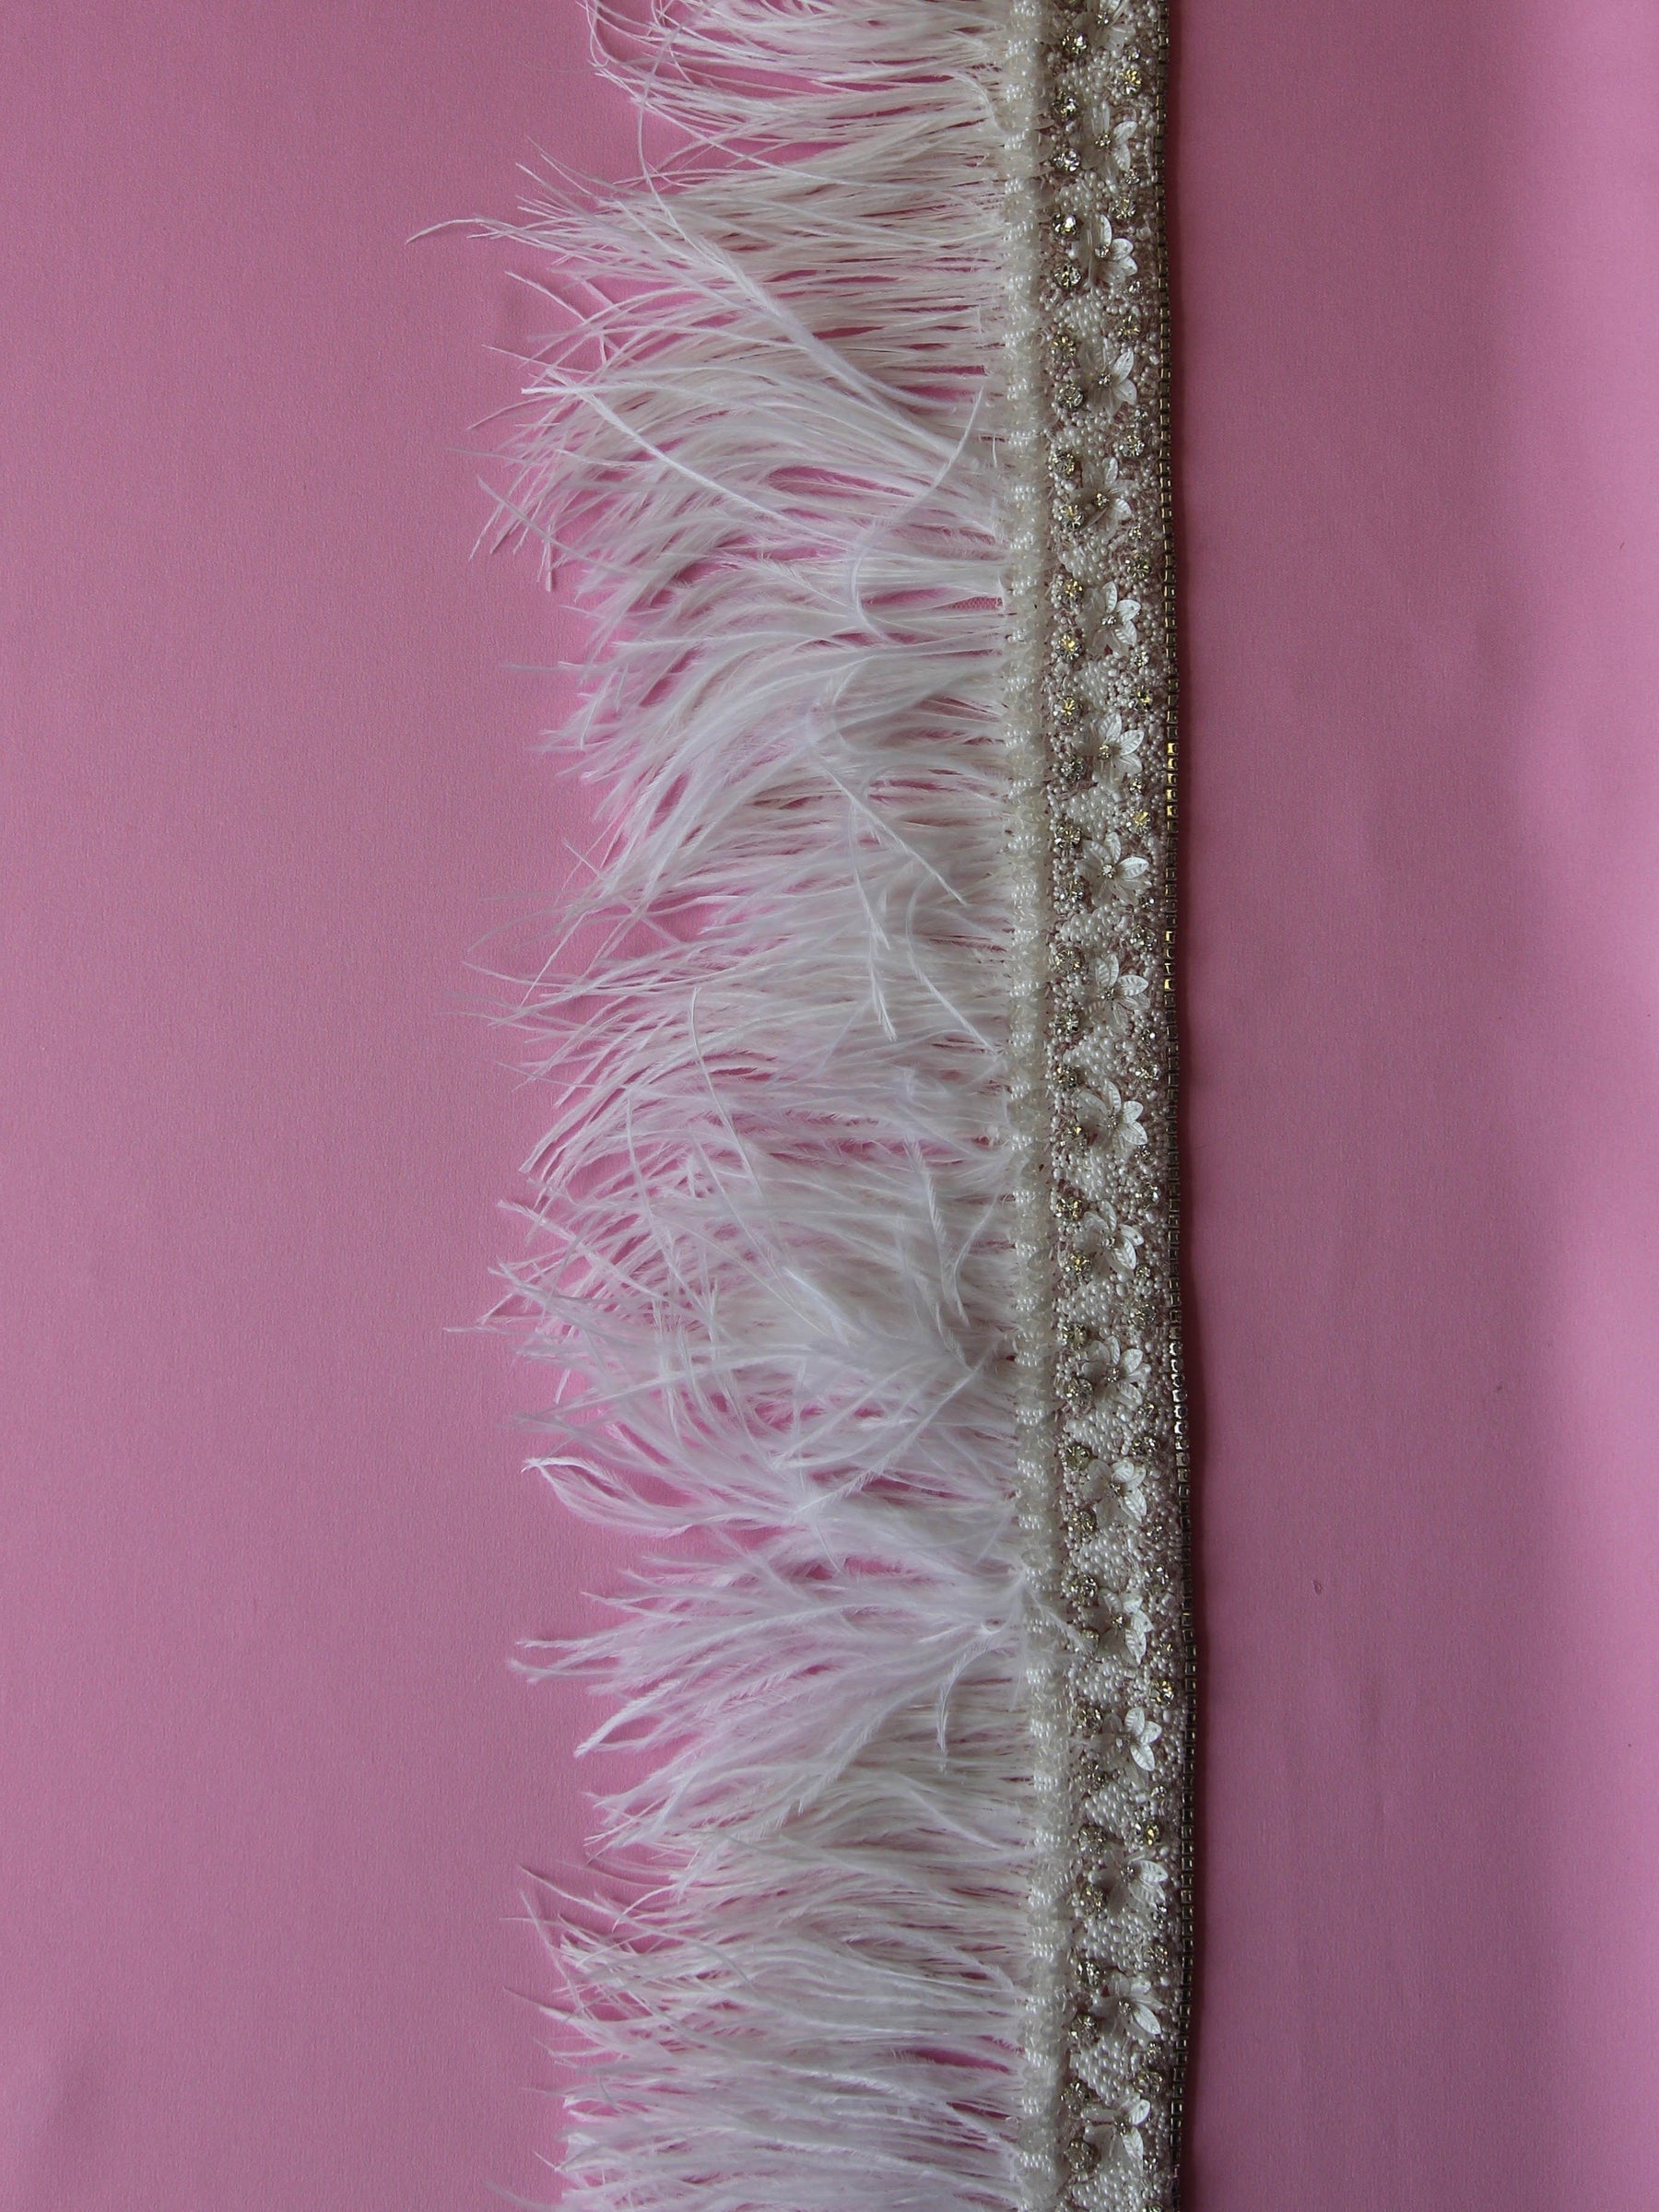 Feathers TRIM Ostrich Feathers Feather Trim Craft Feathers Color Feathers  Pink Feathers Dress Feather Feather Fringe Skirt Feather Trim 